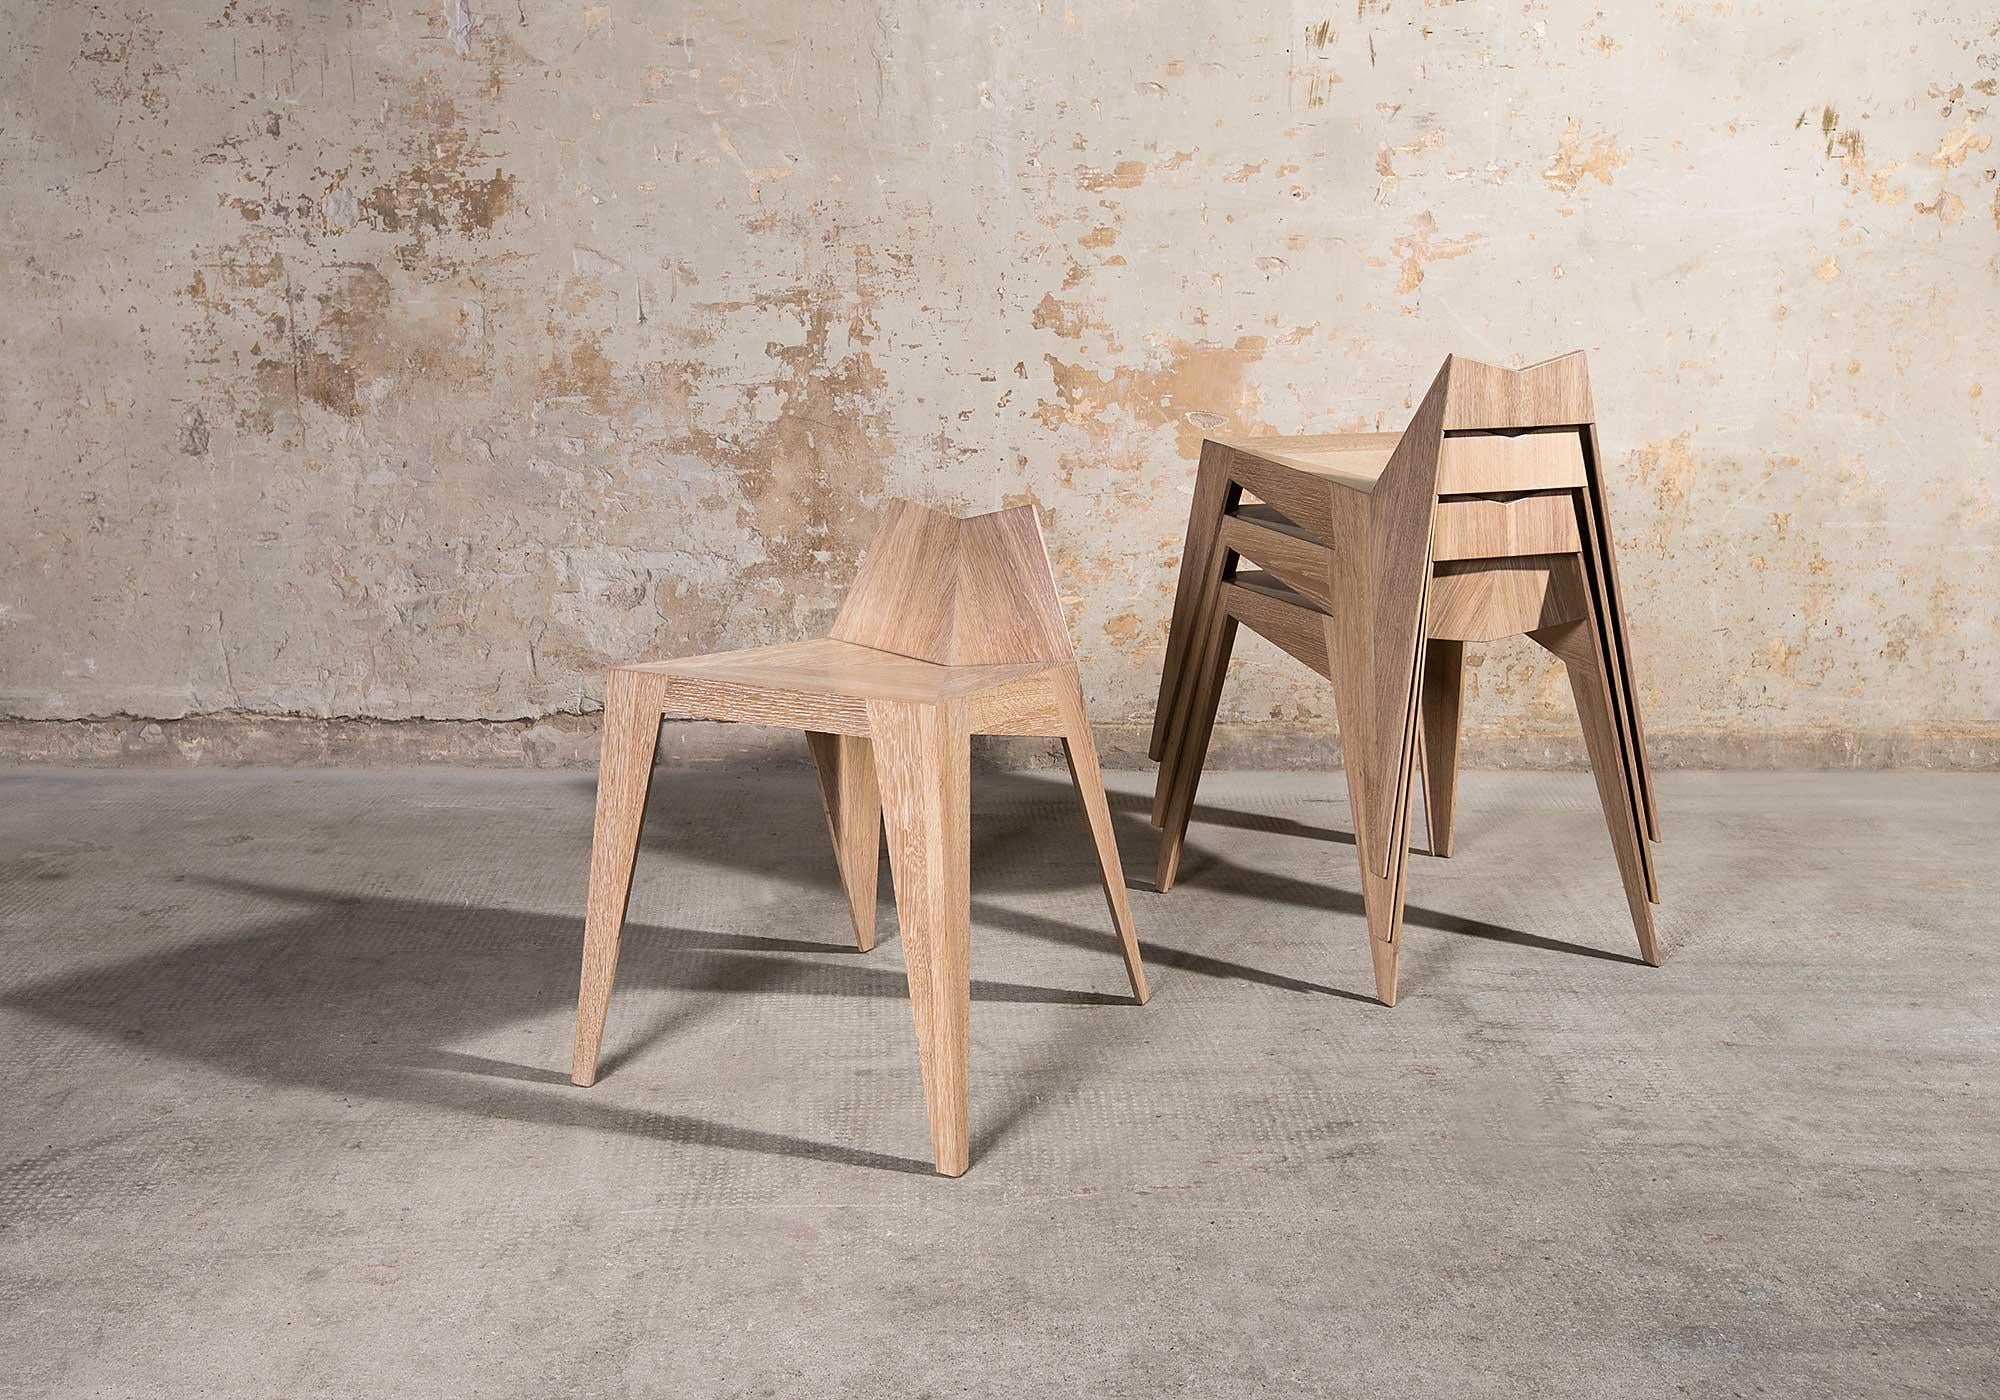 Stocker chair stool by Matthias Scherzinger.
Dimensions: W 48 x L 54 x H 61.5 cm.
Materials: Solid wood oak.

The stocker is a fusion between a stool and a chair.
The light stackable wooden seats are suitable for private and semi-official